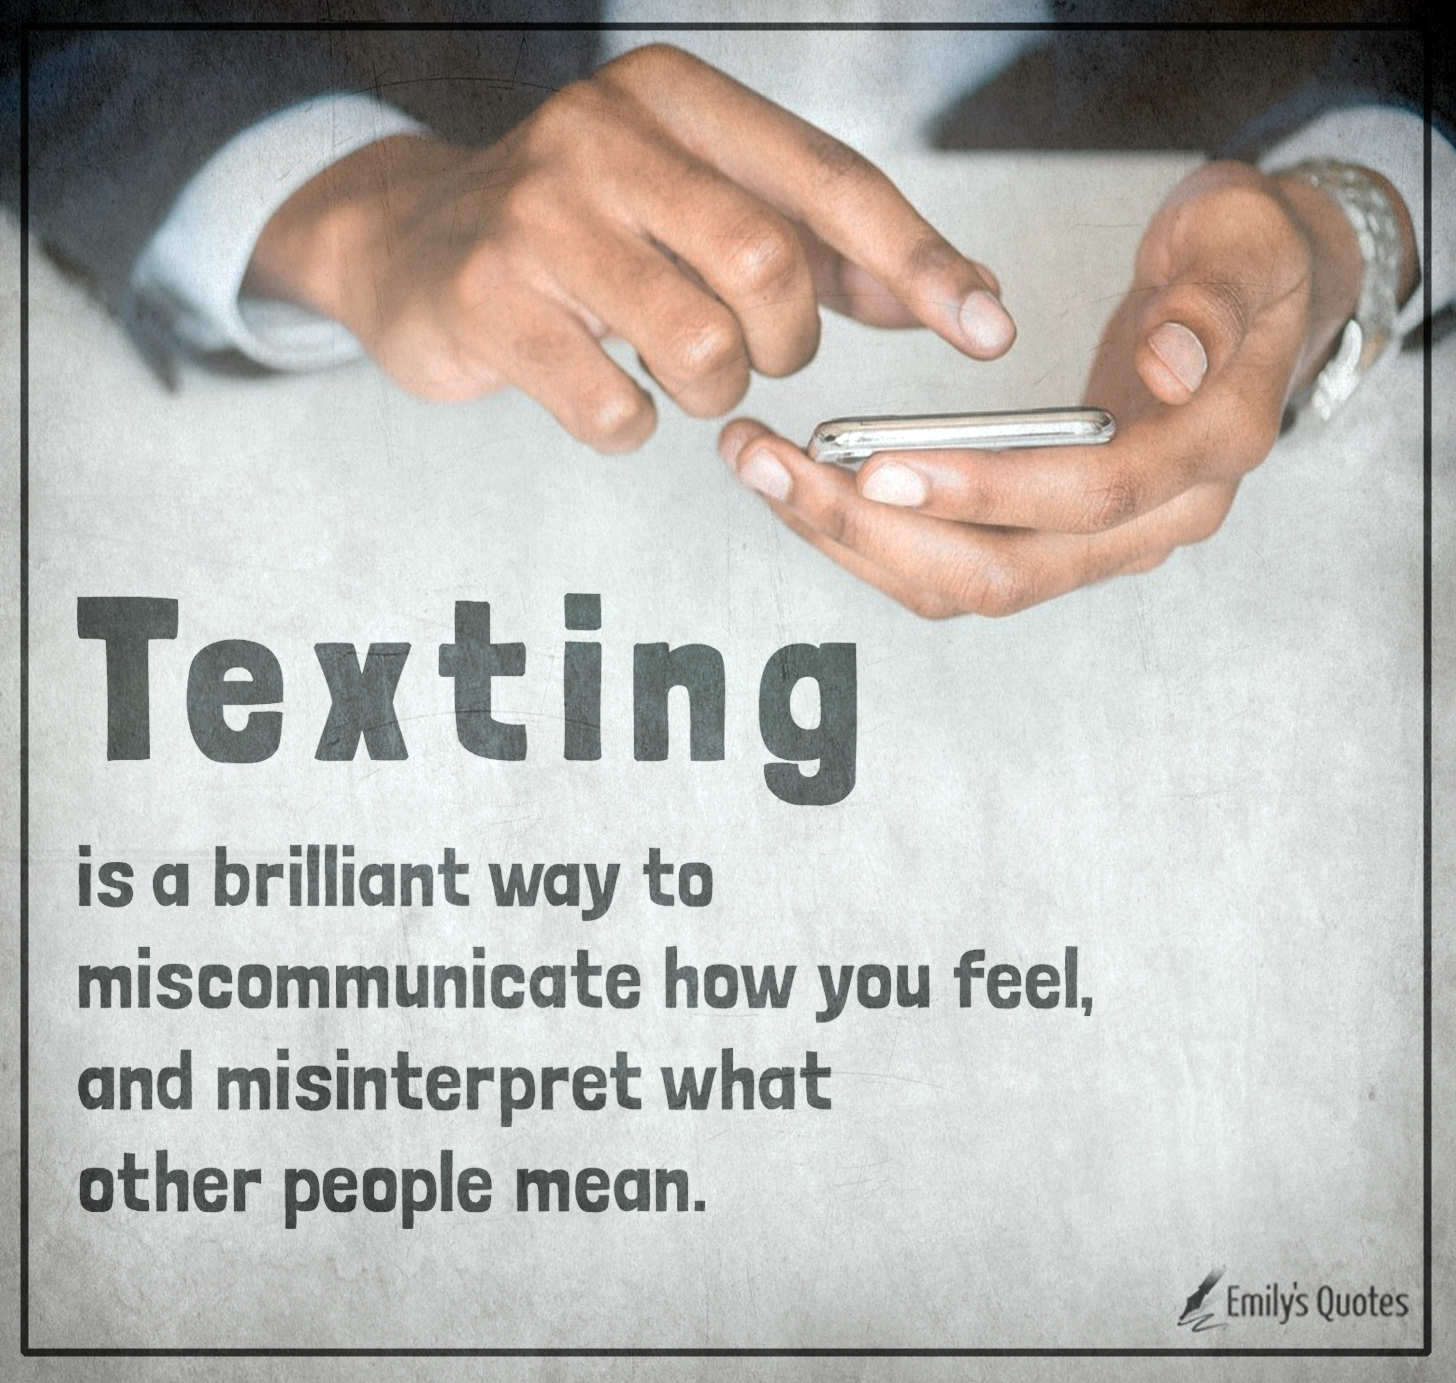 Texting is a brilliant way to miscommunicate how you feel, and misinterpret what other people mean